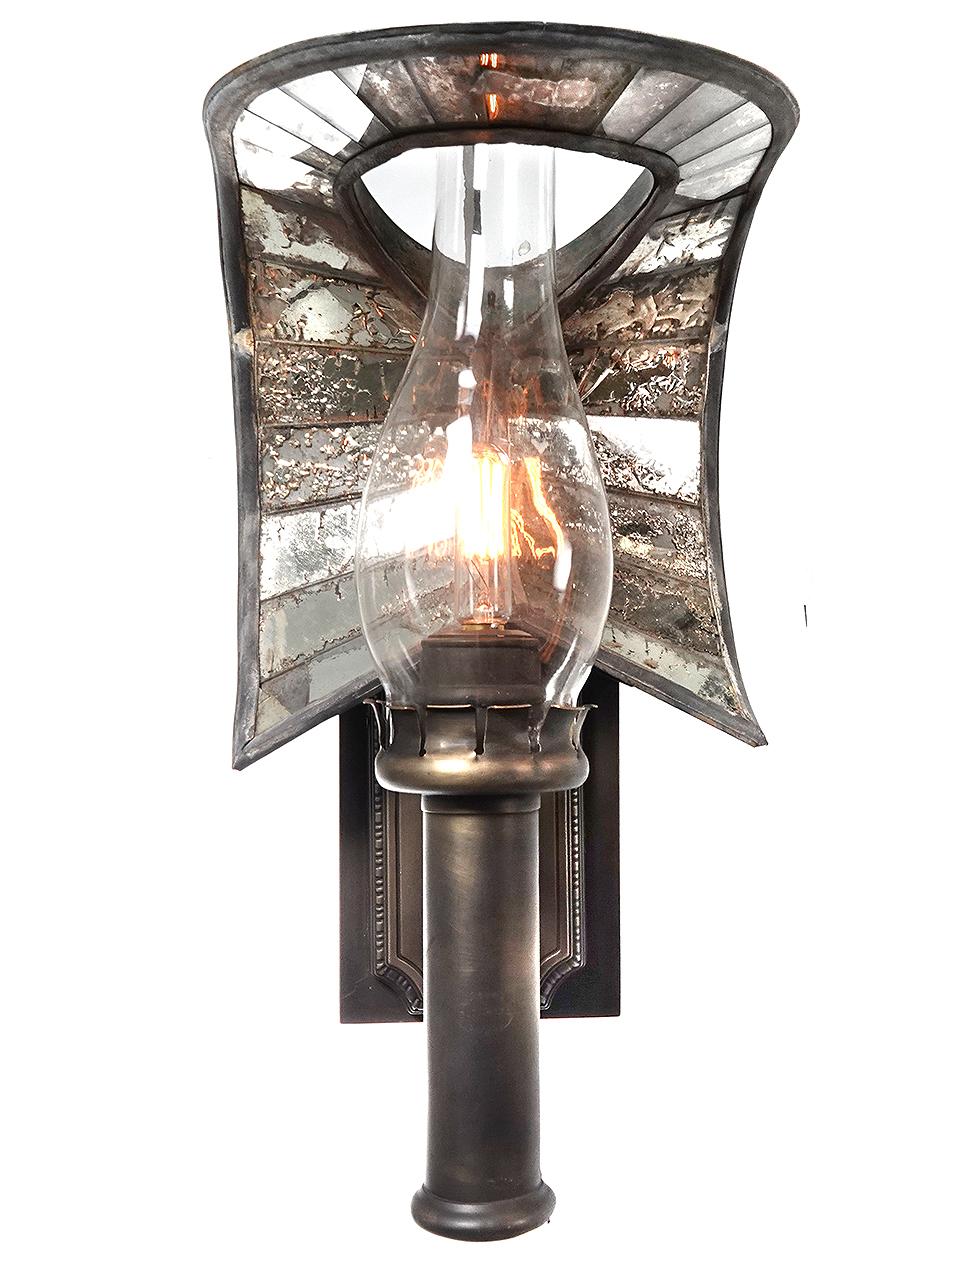 This is an amazing sconce. The lamp is signed Adams and Westlake and it features a rare mirrored reflector. The whale tail reflector is also signed and was made by Wheeler. The mirrors are all original with the original rustic patina. Note that one